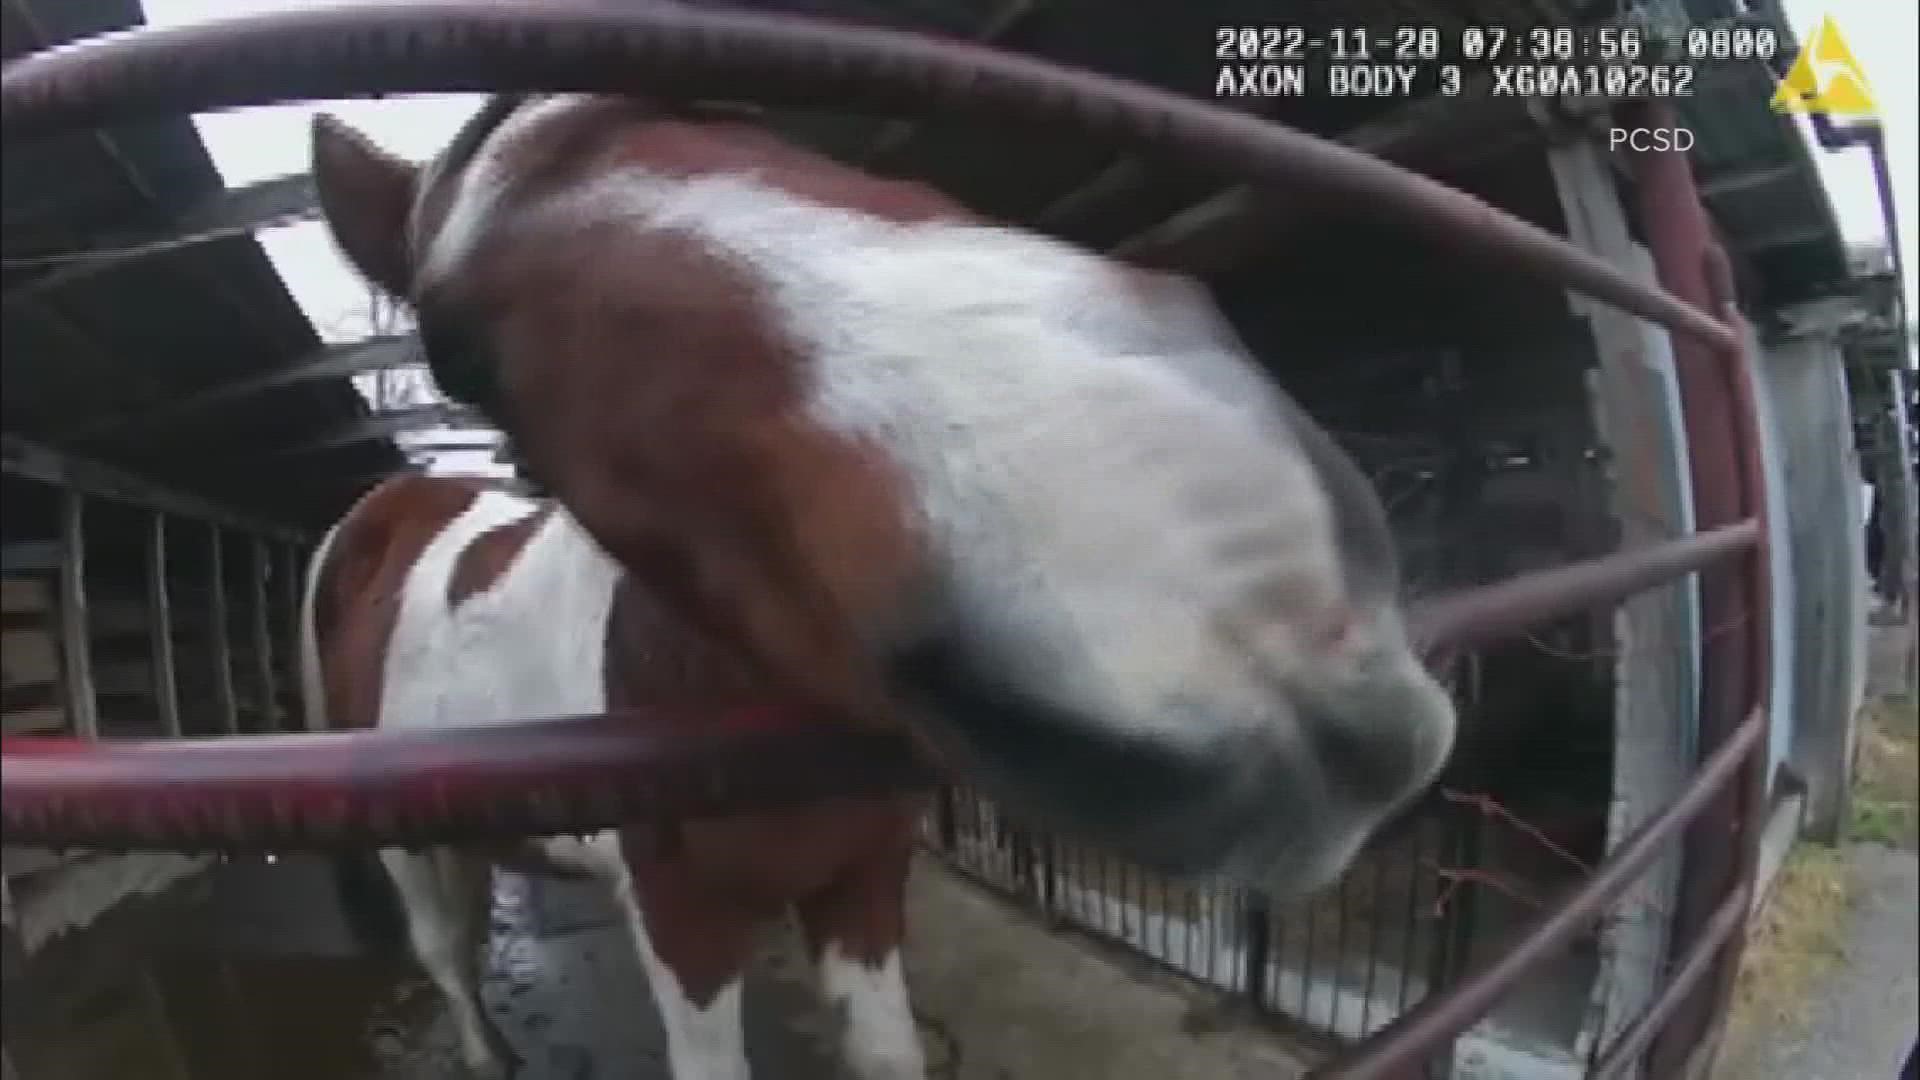 An animal cruelty investigation led to more than two dozen horses being seized.